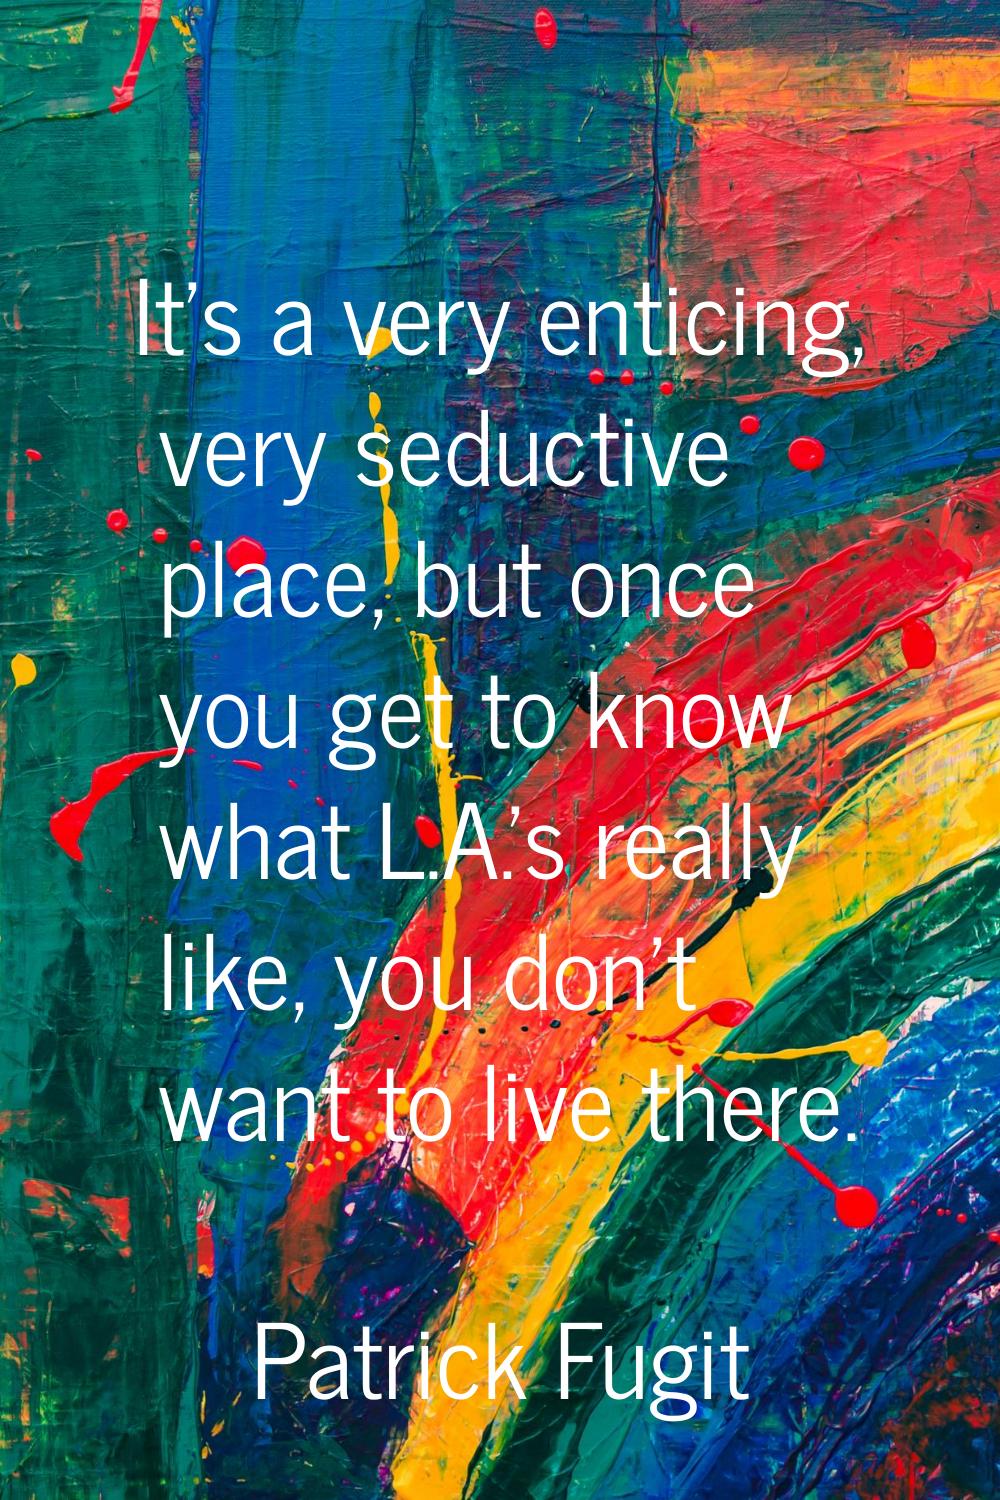 It's a very enticing, very seductive place, but once you get to know what L.A.'s really like, you d